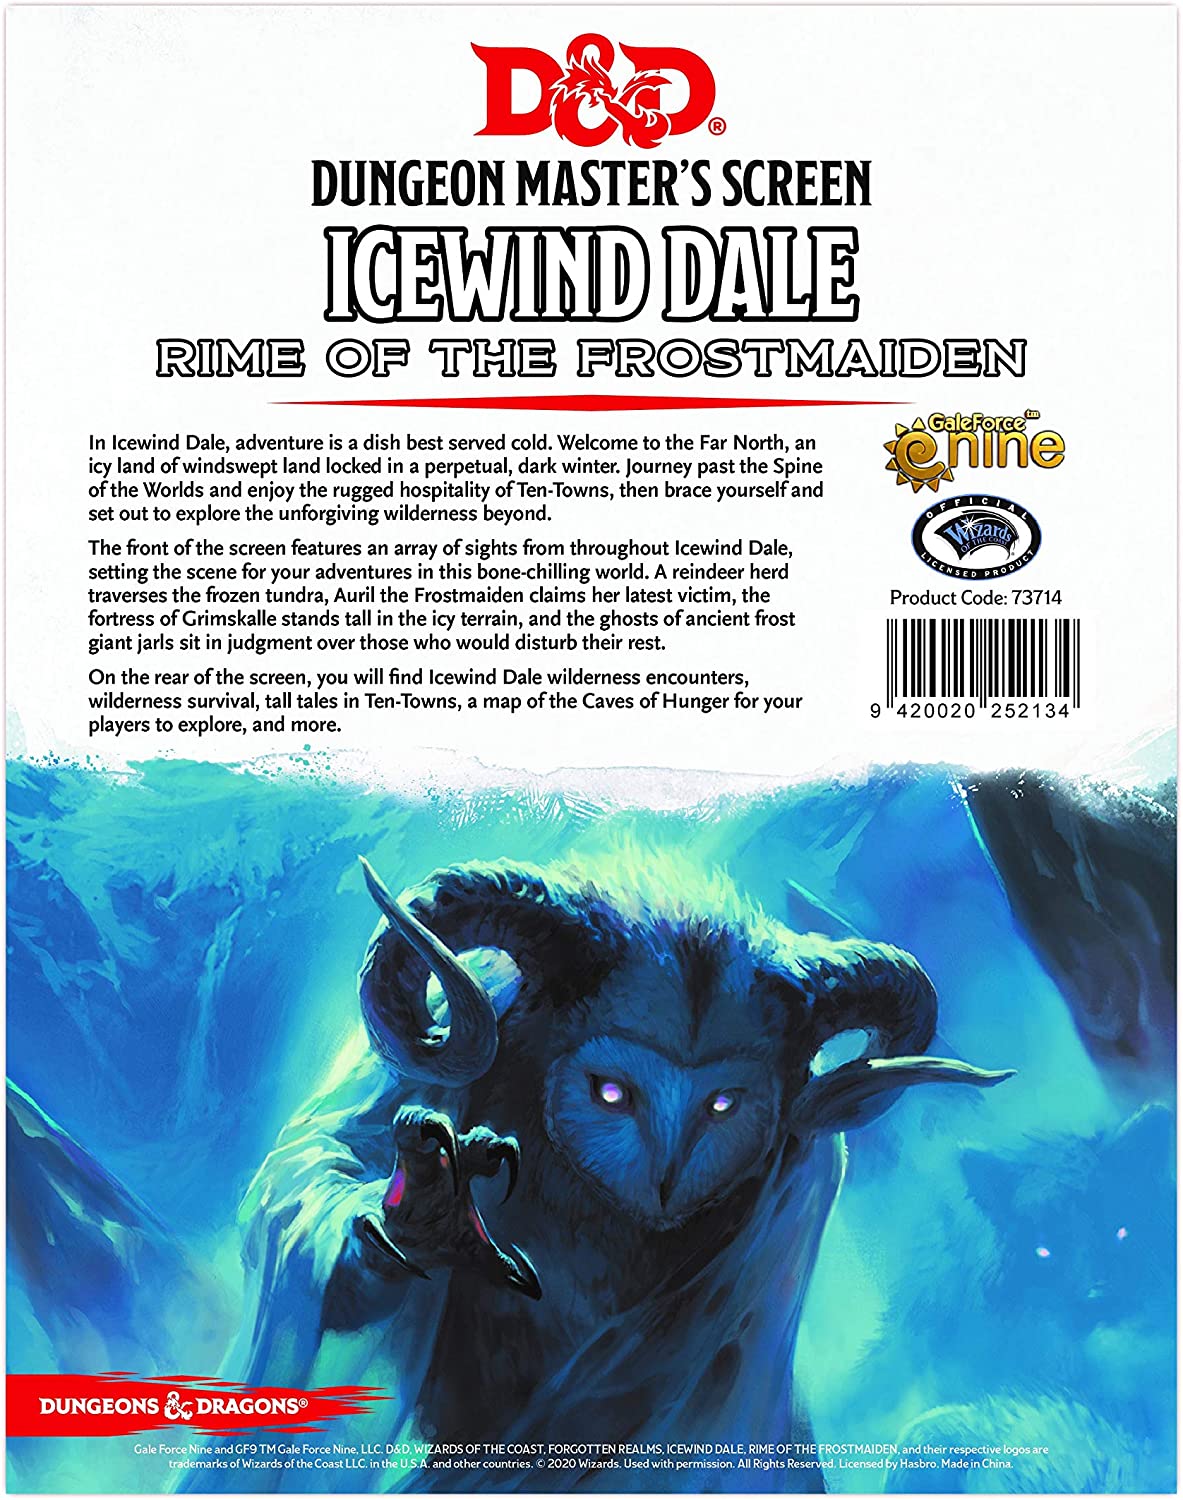 GALE FORCE 9 - DM Screen Icewind Dale Rime of The Frostmaiden